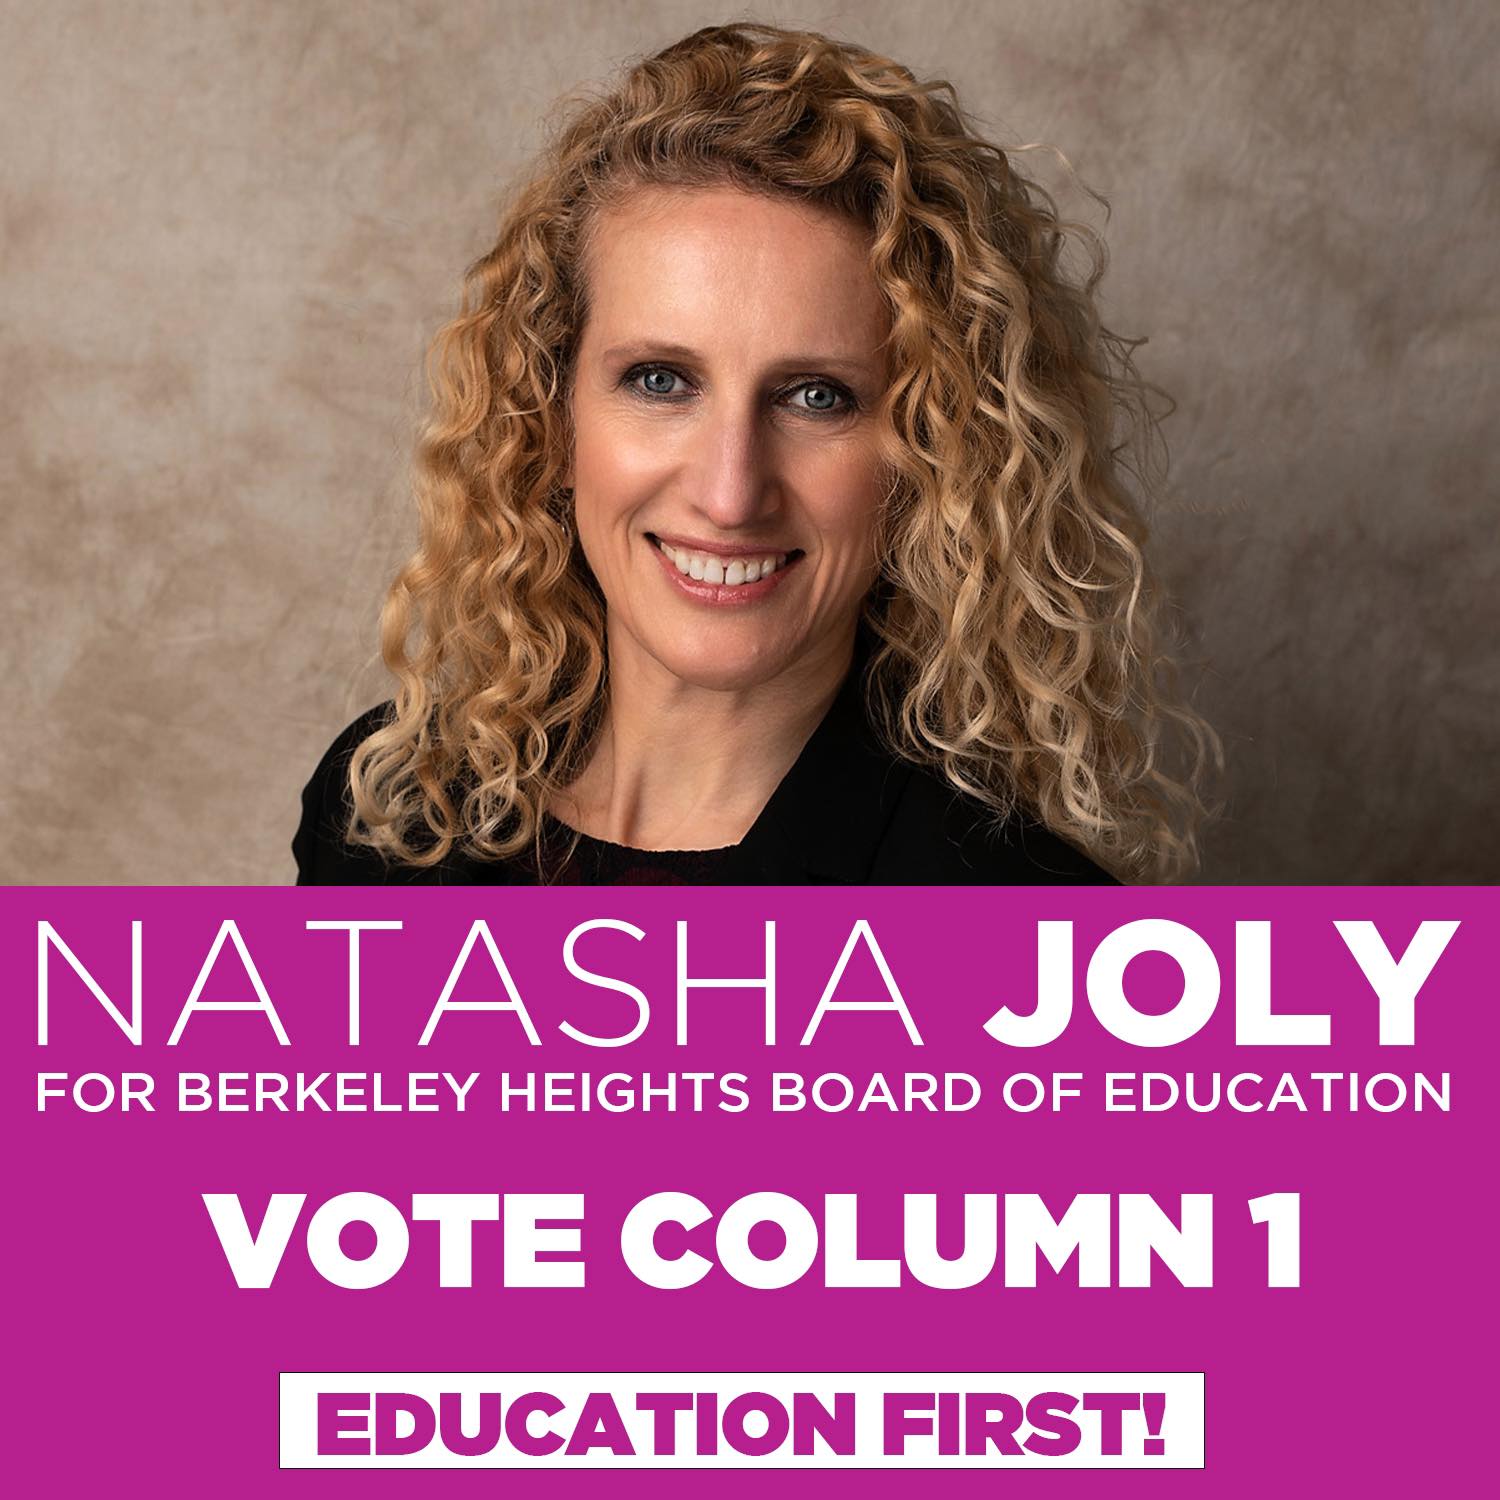 In support of Natasha Joly – The BOE candidate Berkeley Heights (still) needs